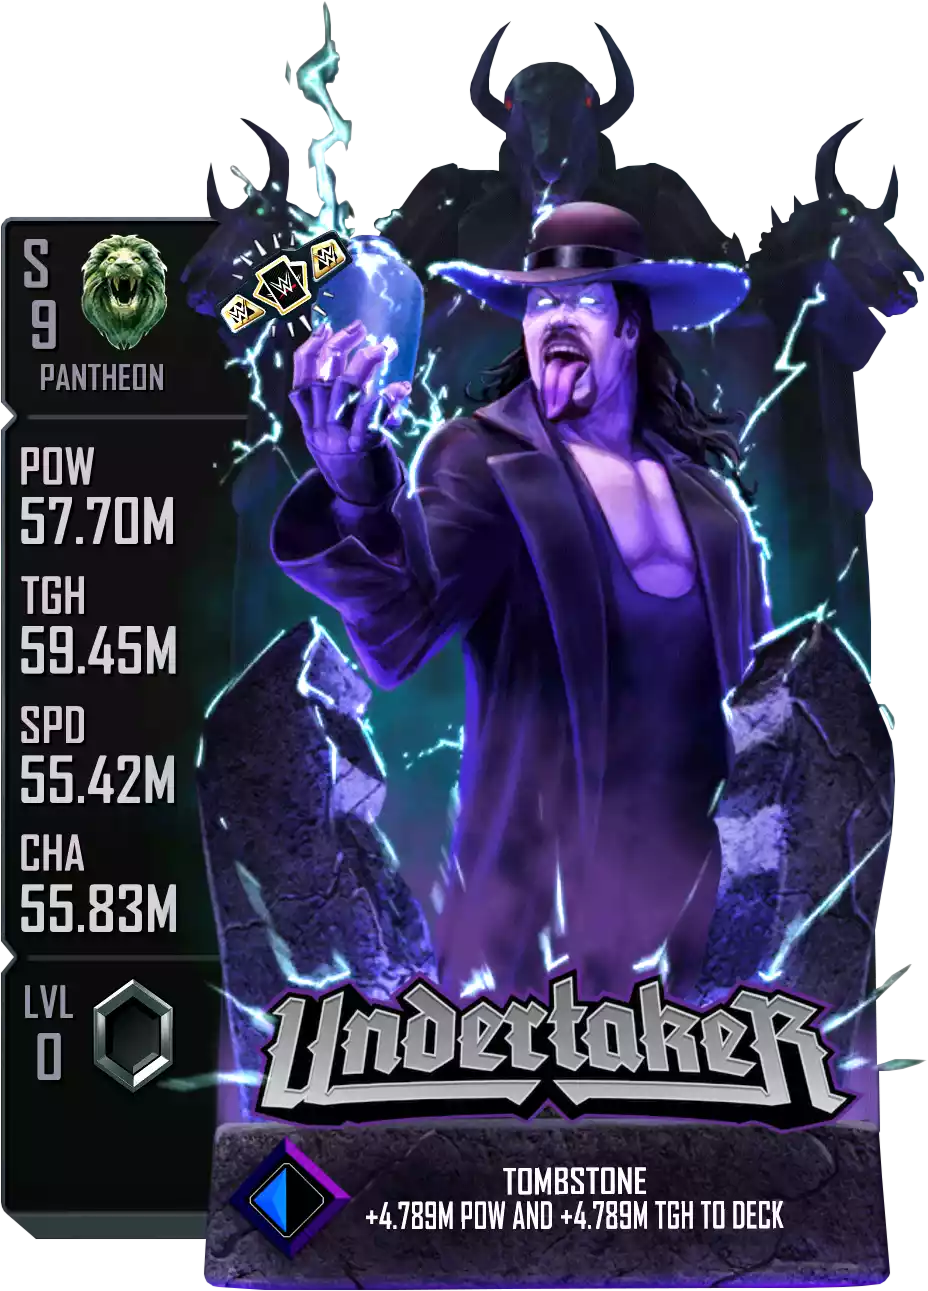 Pantheon - Undertaker - Special Edition (SE) Card from WWE Supercard